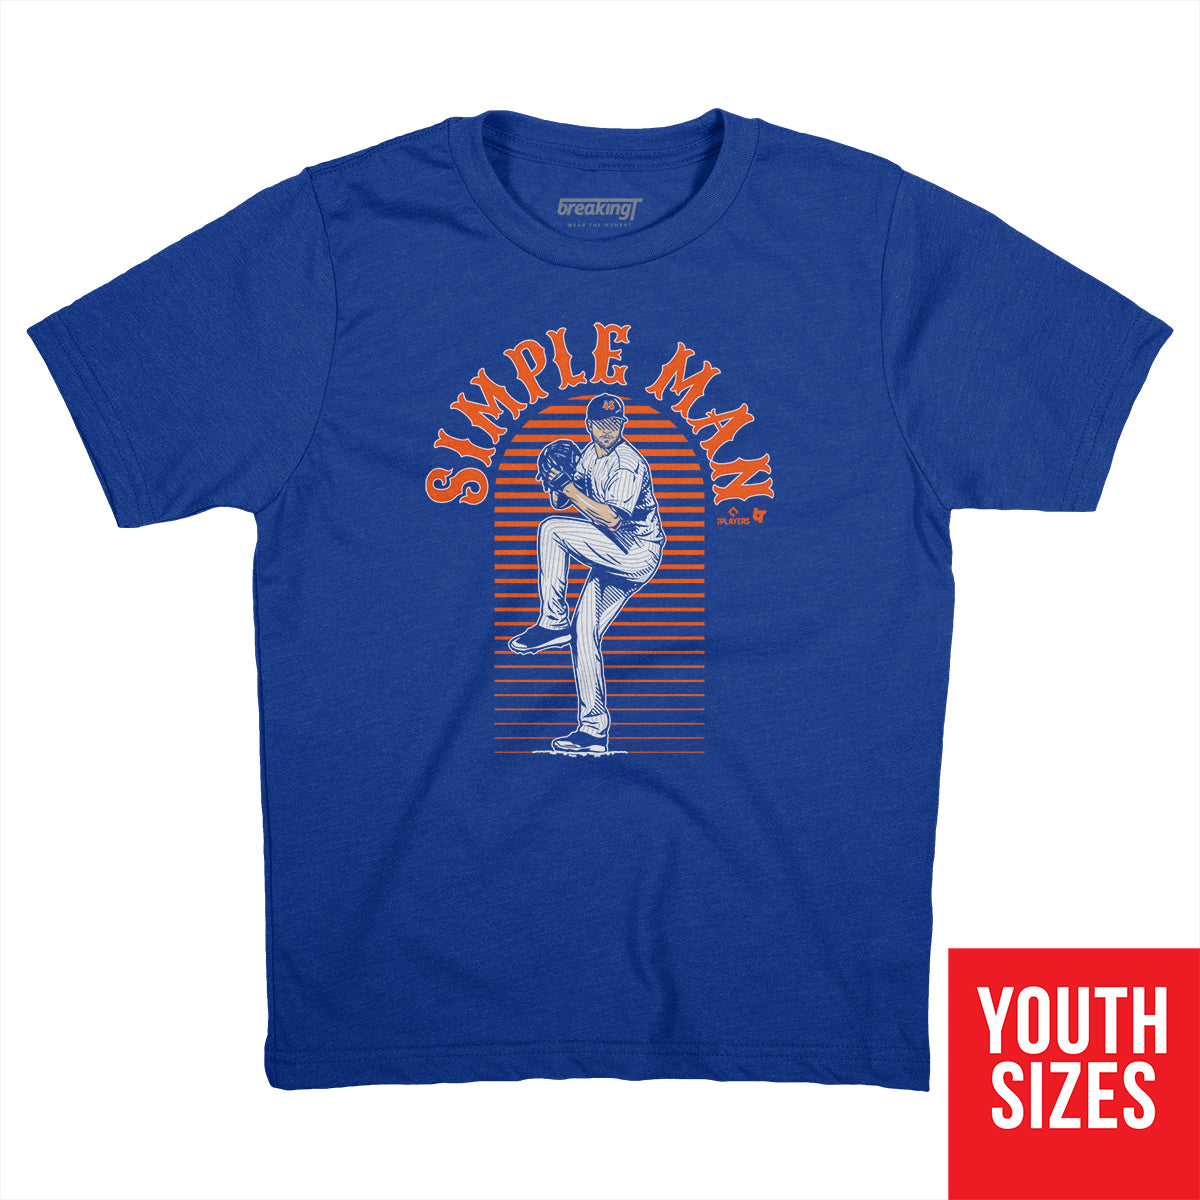 New Jacob deGrom t-shirts from BreakingT - Lone Star Ball